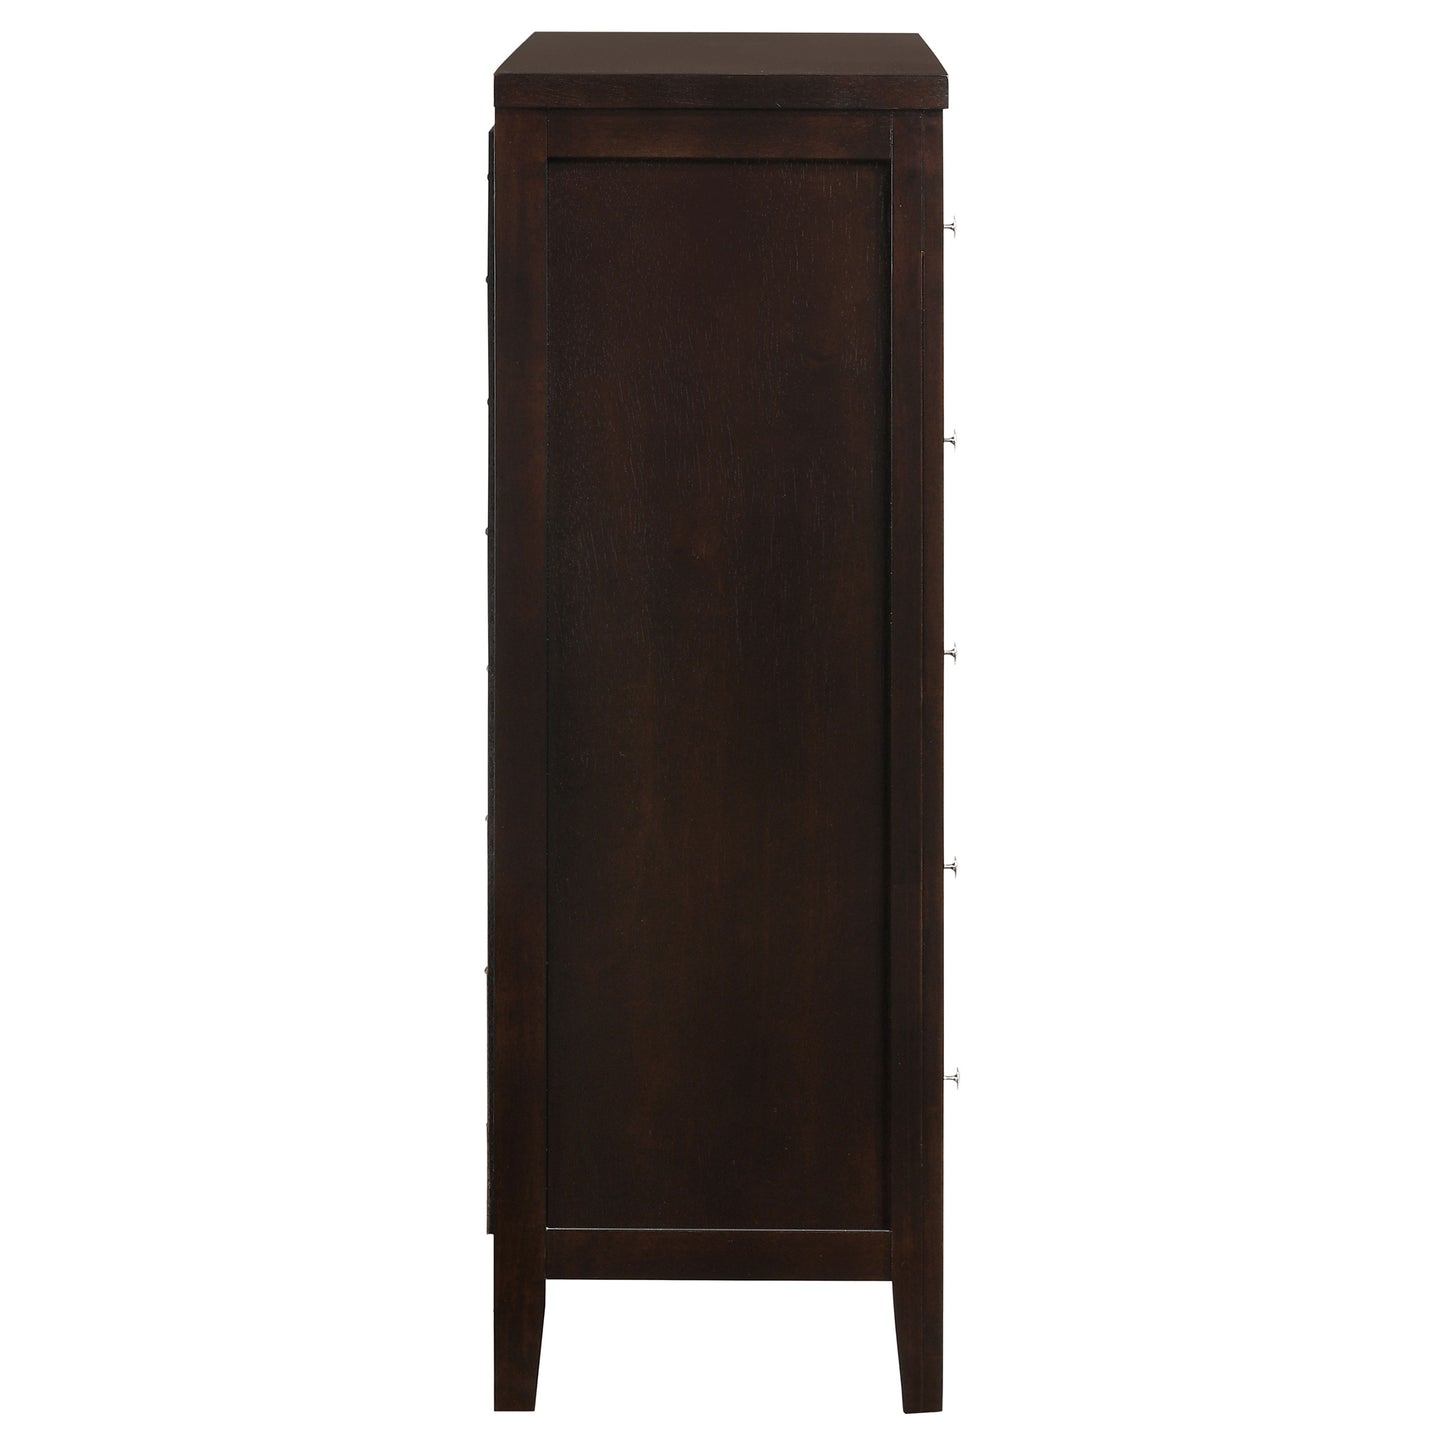 Carlton 5-drawer Bedroom Chest Cappuccino